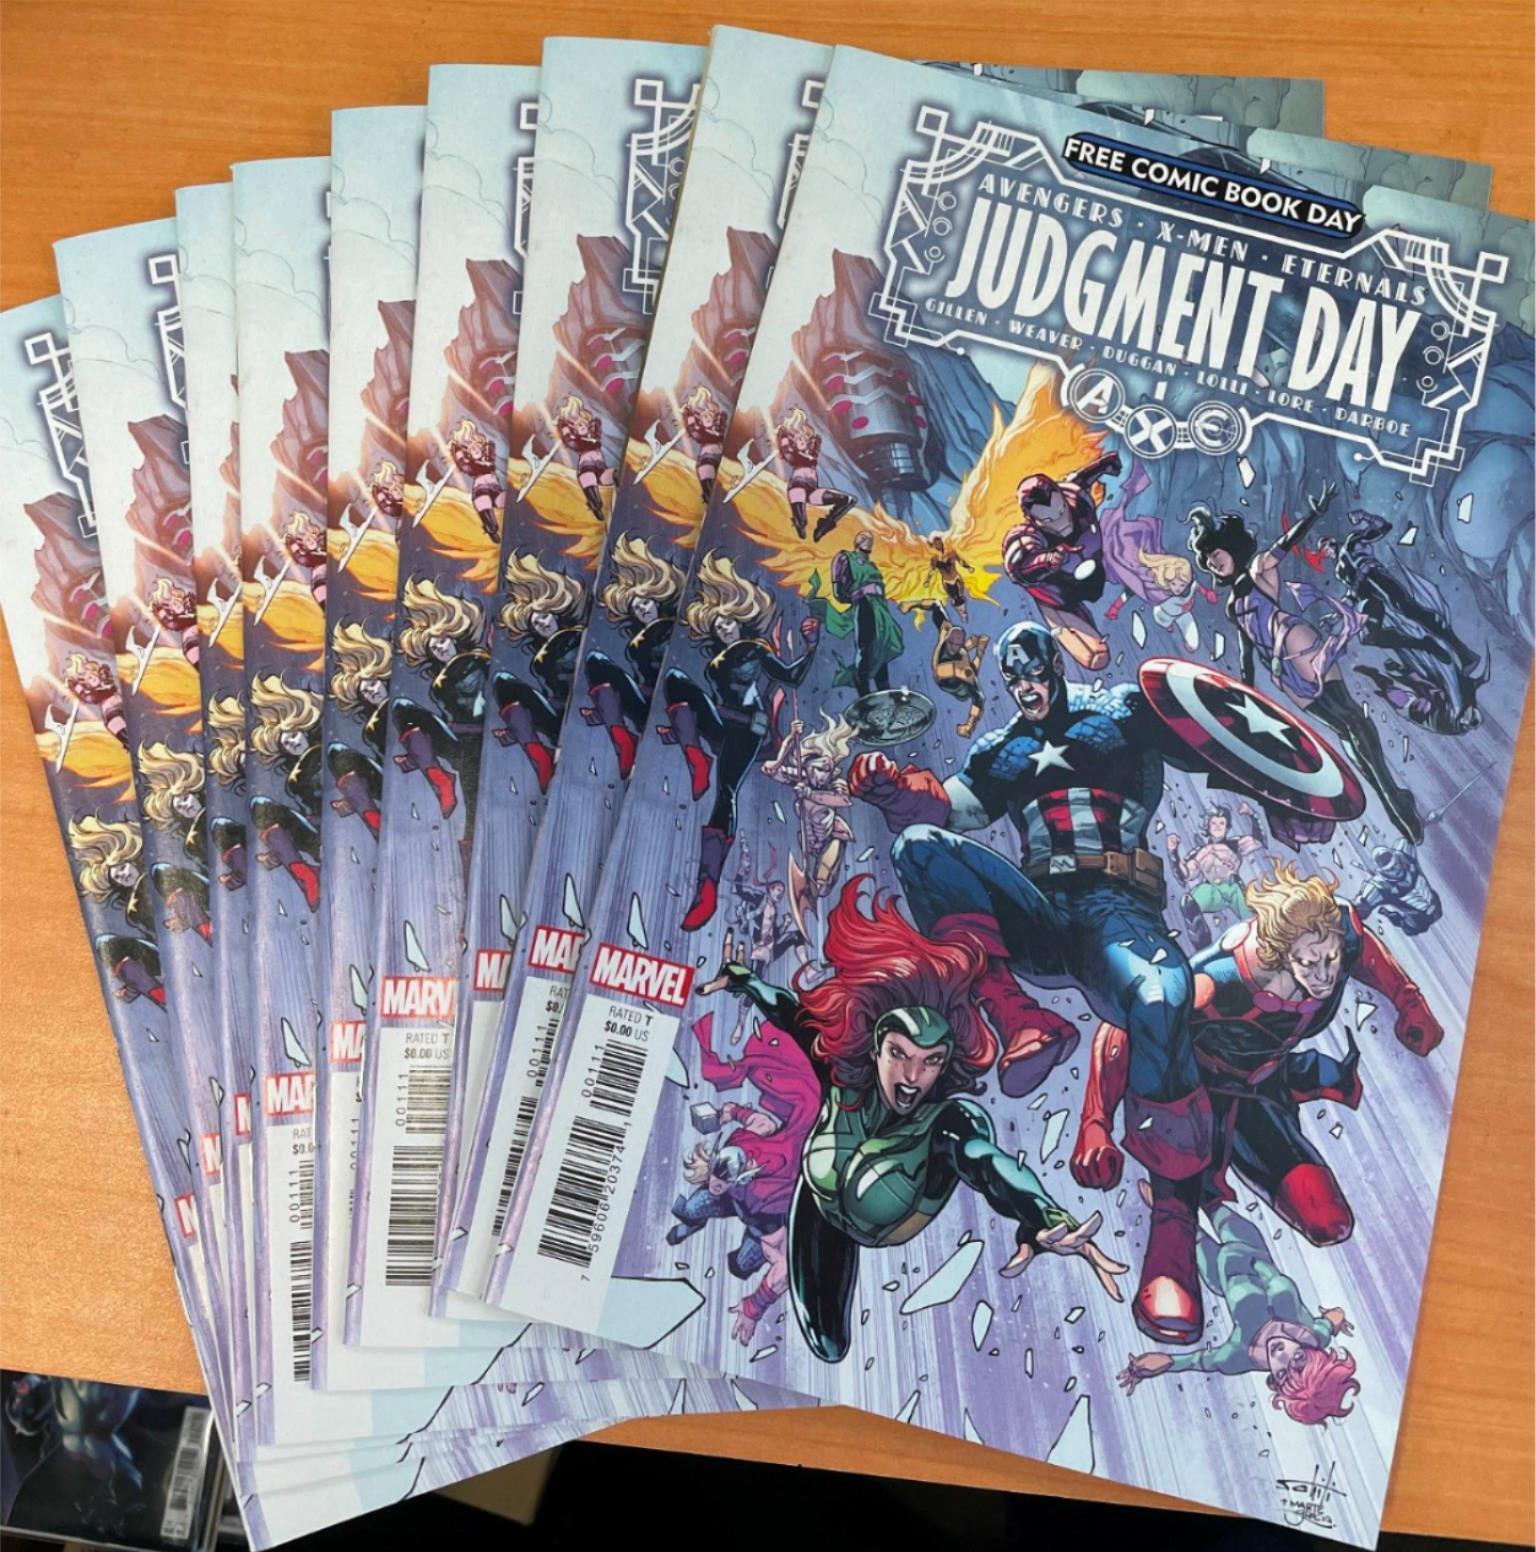 FREE COMIC BOOK DAY AXE JUDGMENT DAY #1-PACK OF 10-1ST BLOODLINE BLADES DAUGHTER